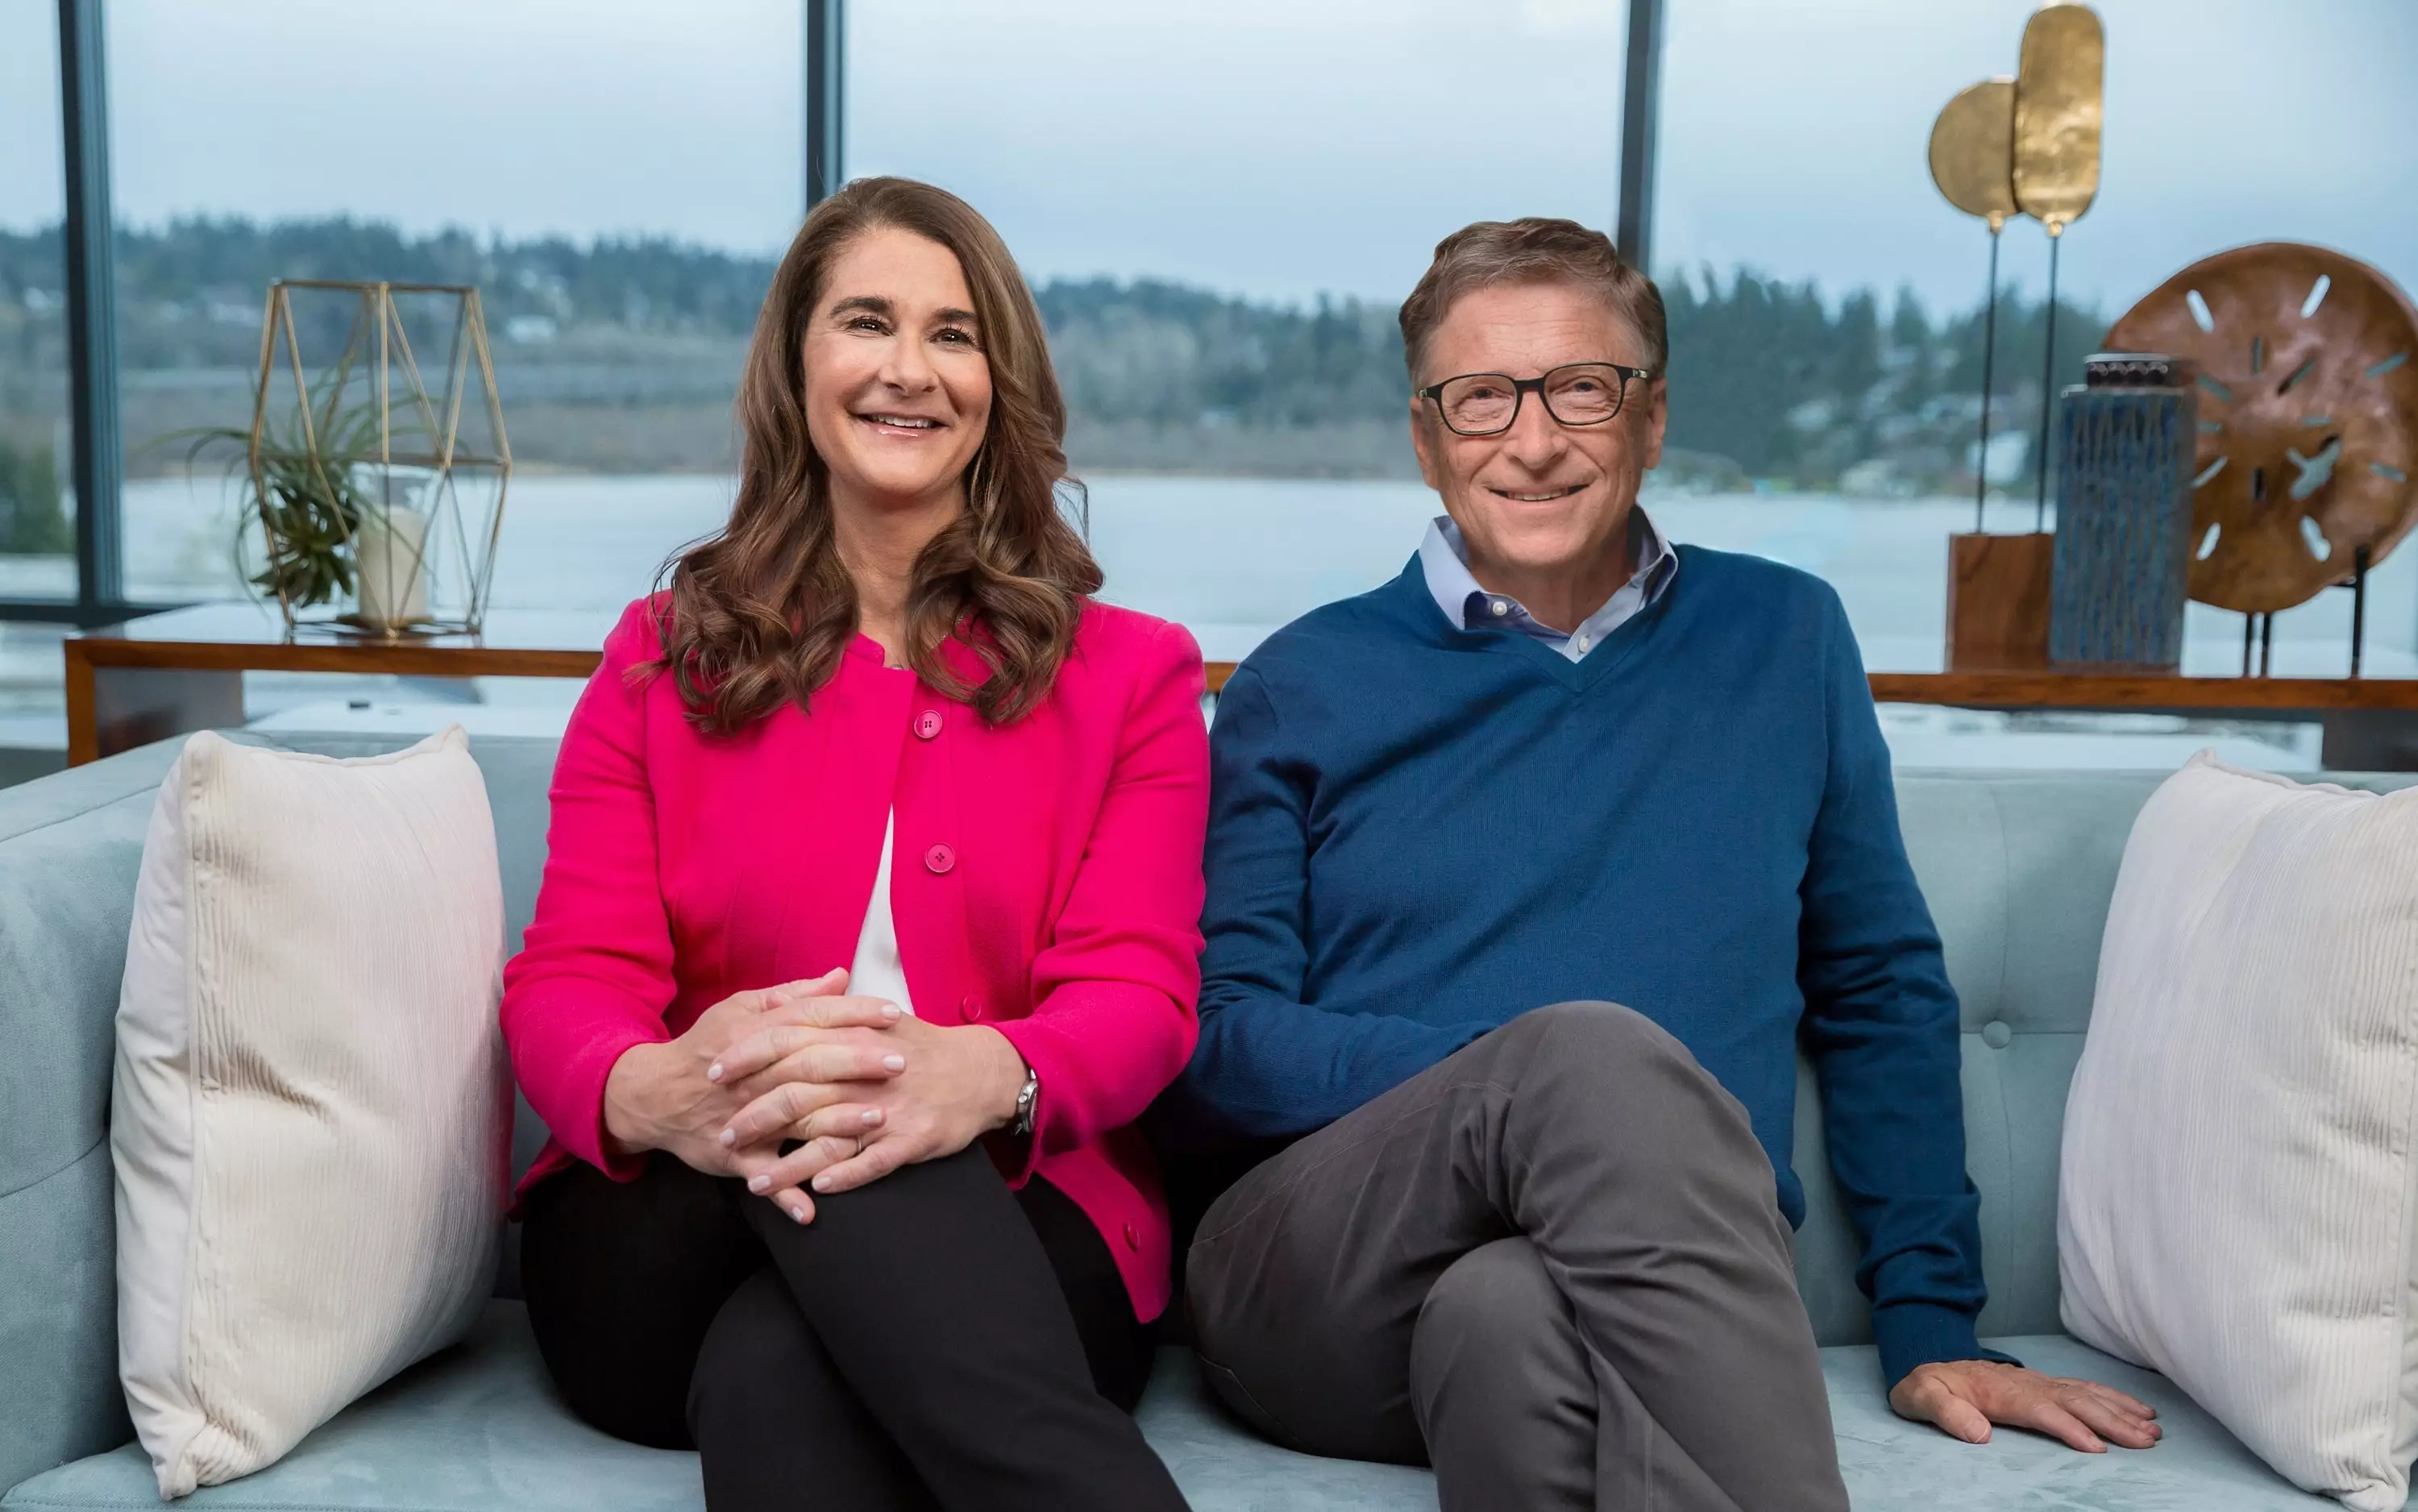 Bill and Melinda Gates' foundation is developing vaccines for Malaria, HIV and TB.